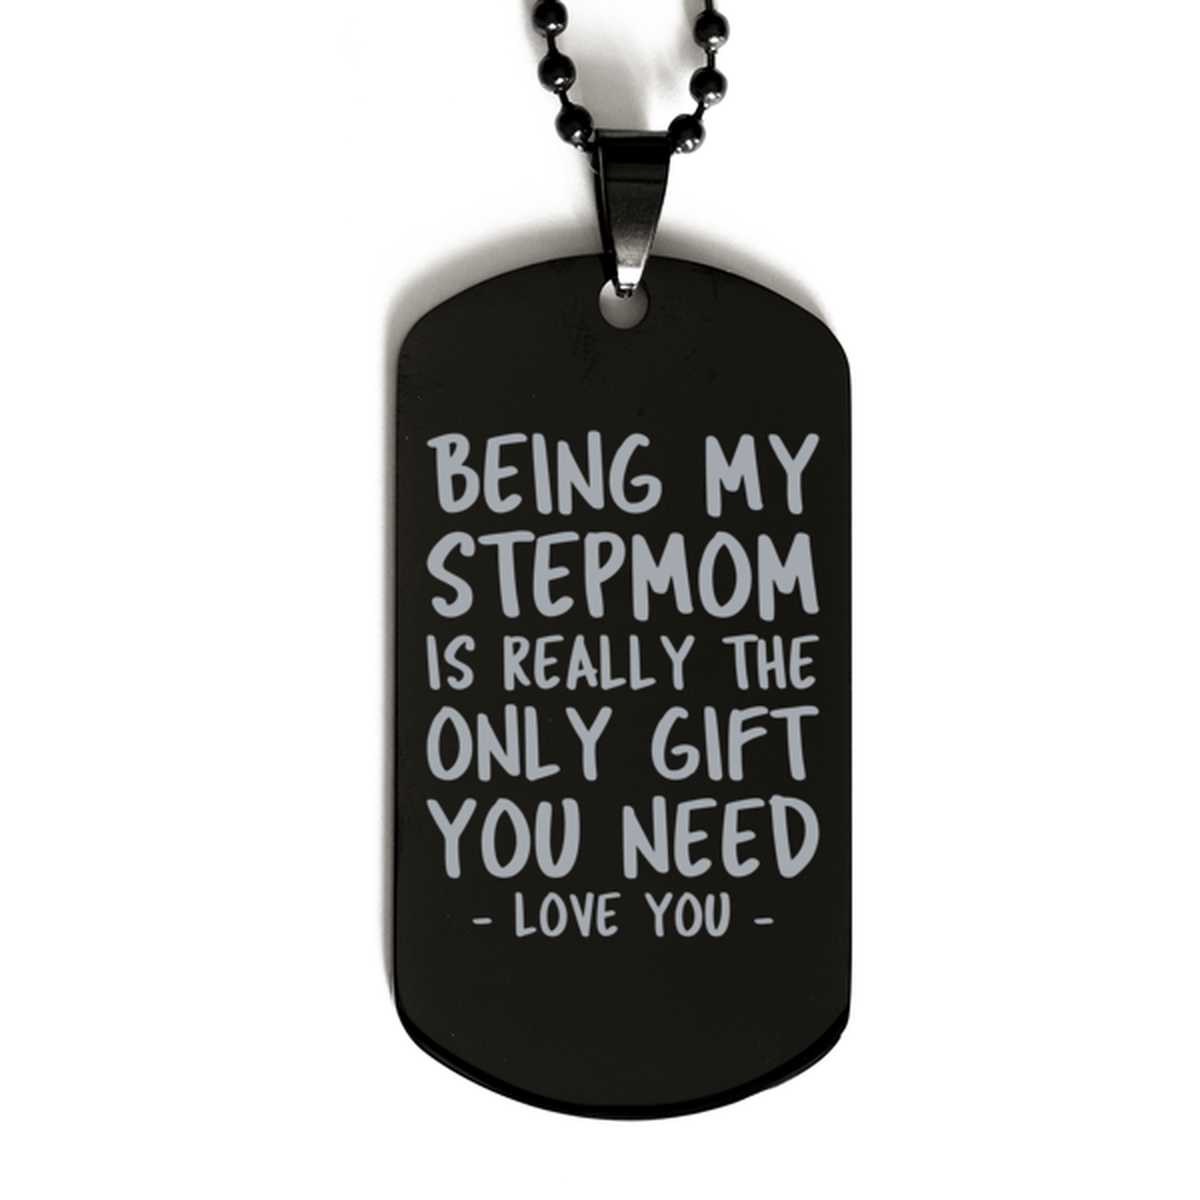 Funny Stepmom Black Dog Tag Necklace, Being My Stepmom Is Really the Only Gift You Need, Best Birthday Gifts for Stepmom